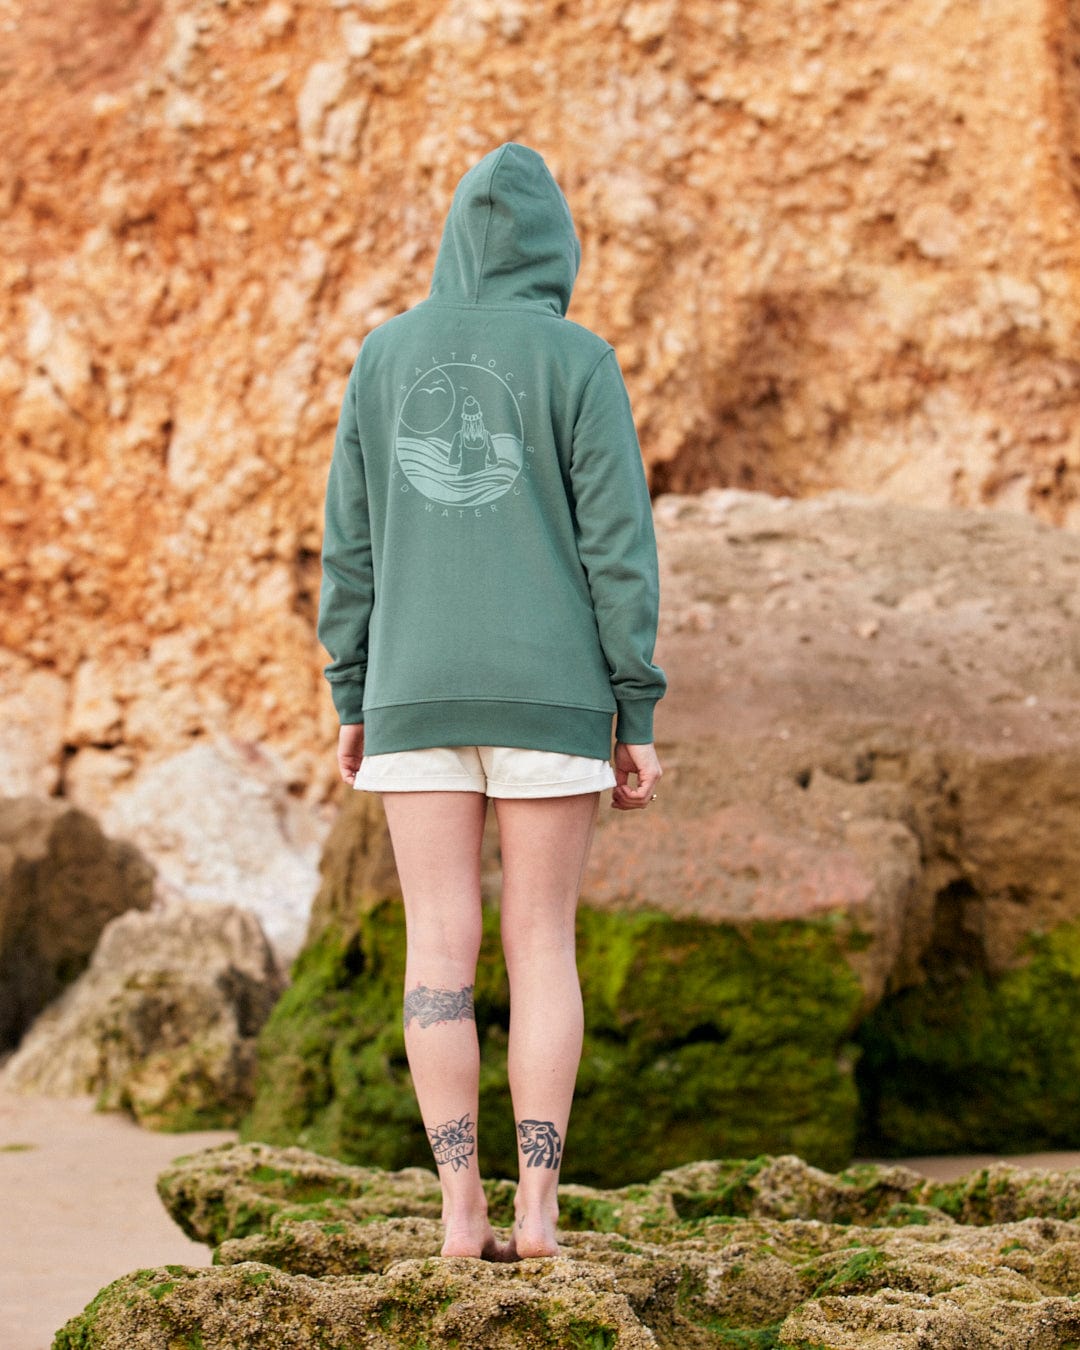 A person in a Coldwater Club - Ladies Zip Hoodie - Green standing on a rocky beach facing away from the camera, featuring subtle Saltrock branding.